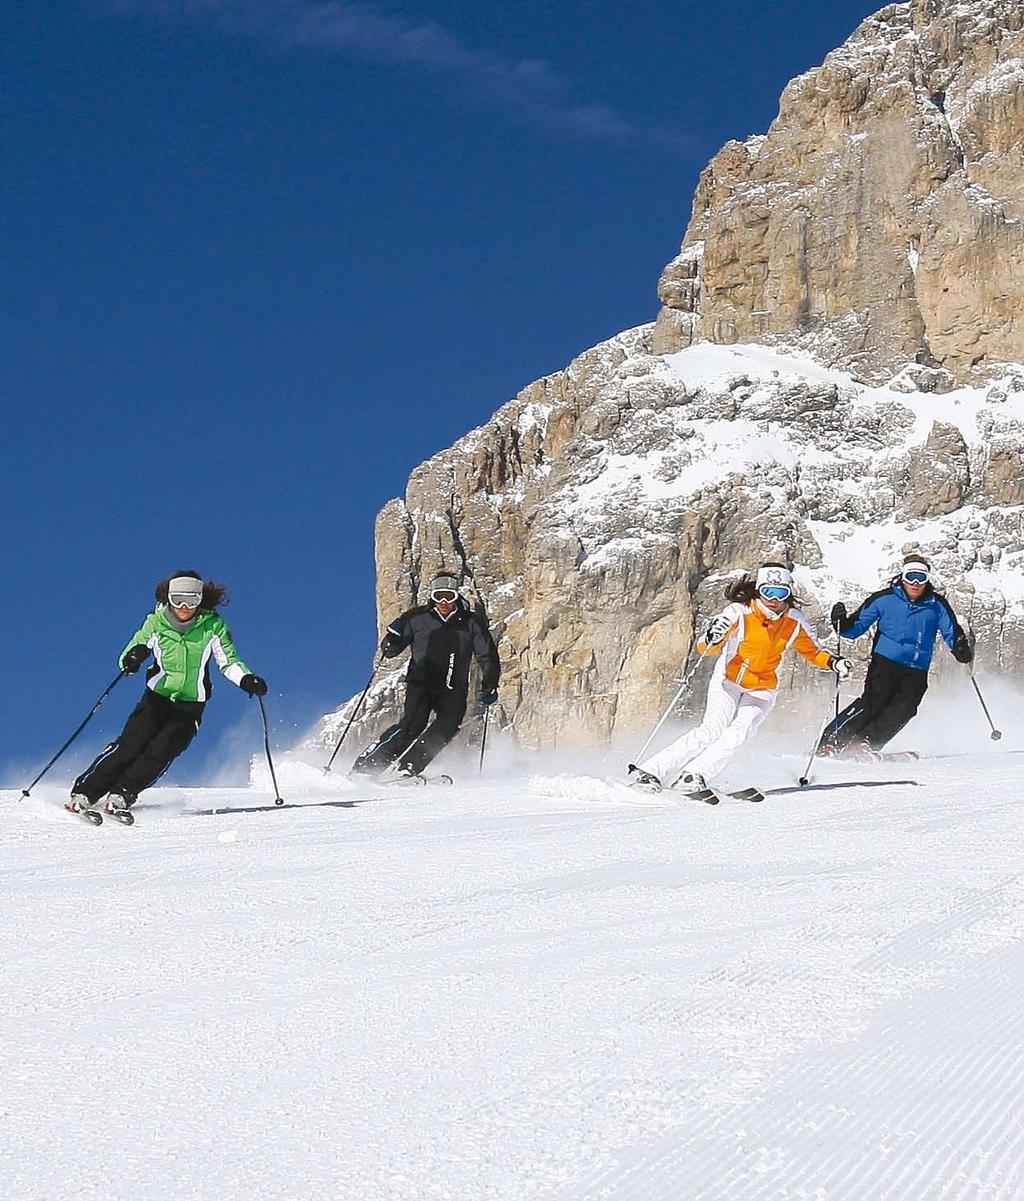 ski italy 2012 DOLOMITES MOUNTAINS 26 years in the Ski Italy business g Gourmet food & wine g Spectacular scenery g Modern infrastructure g Traditional atmosphere g